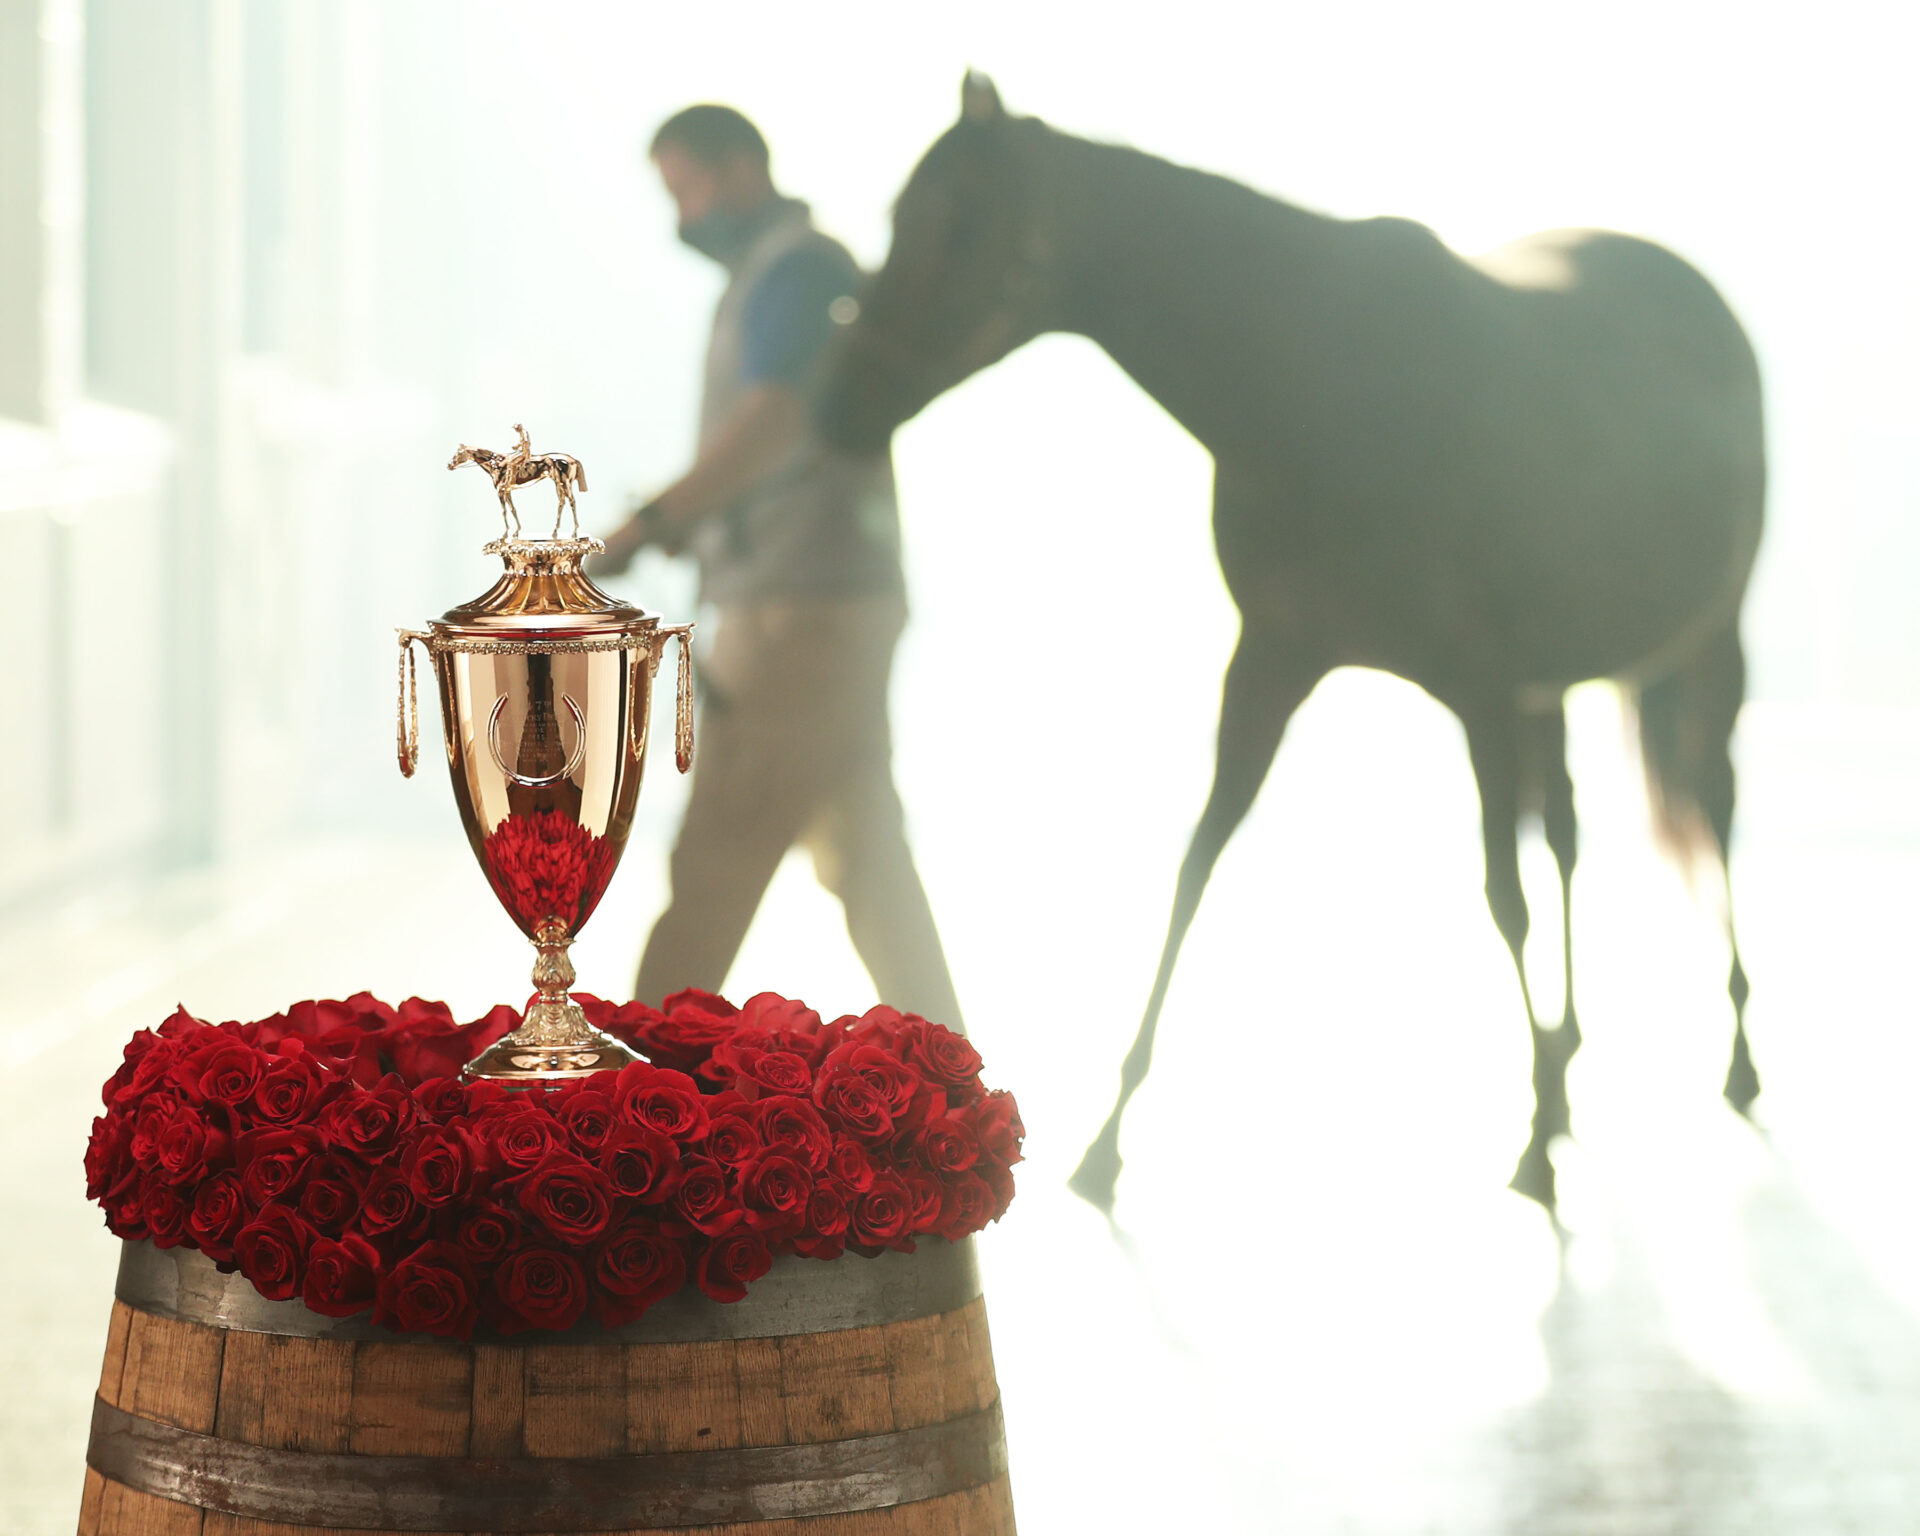 Essential Quality Draws Post 14, Named 2/1 Favorite for Kentucky Derby